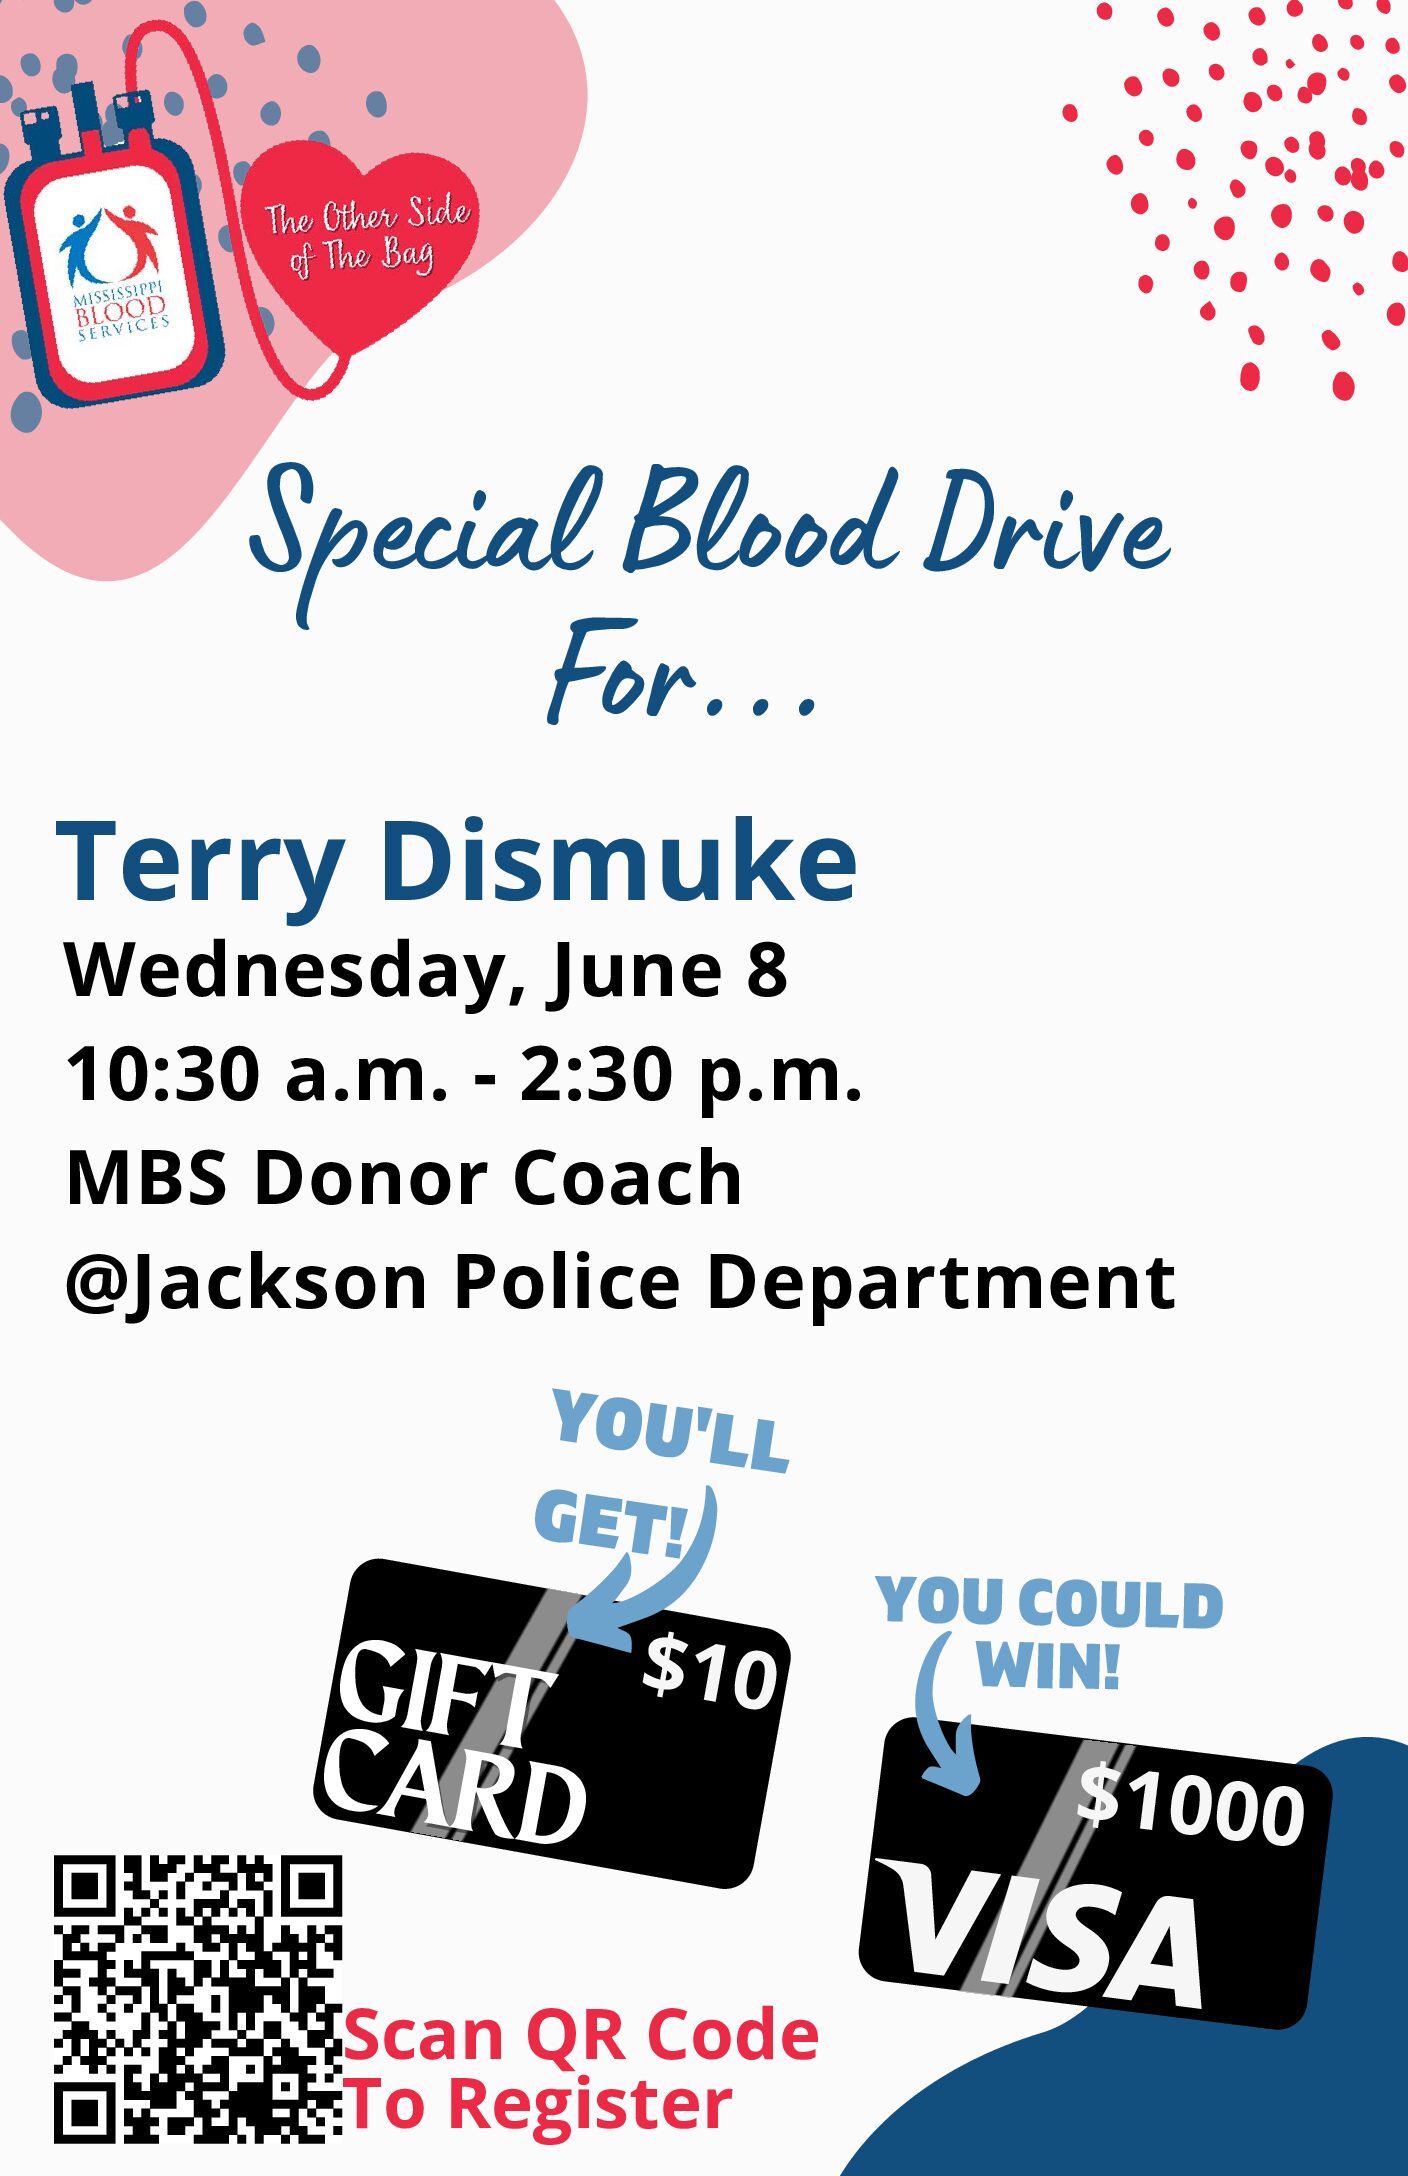 Special Blood Drive: Terry Dismuke